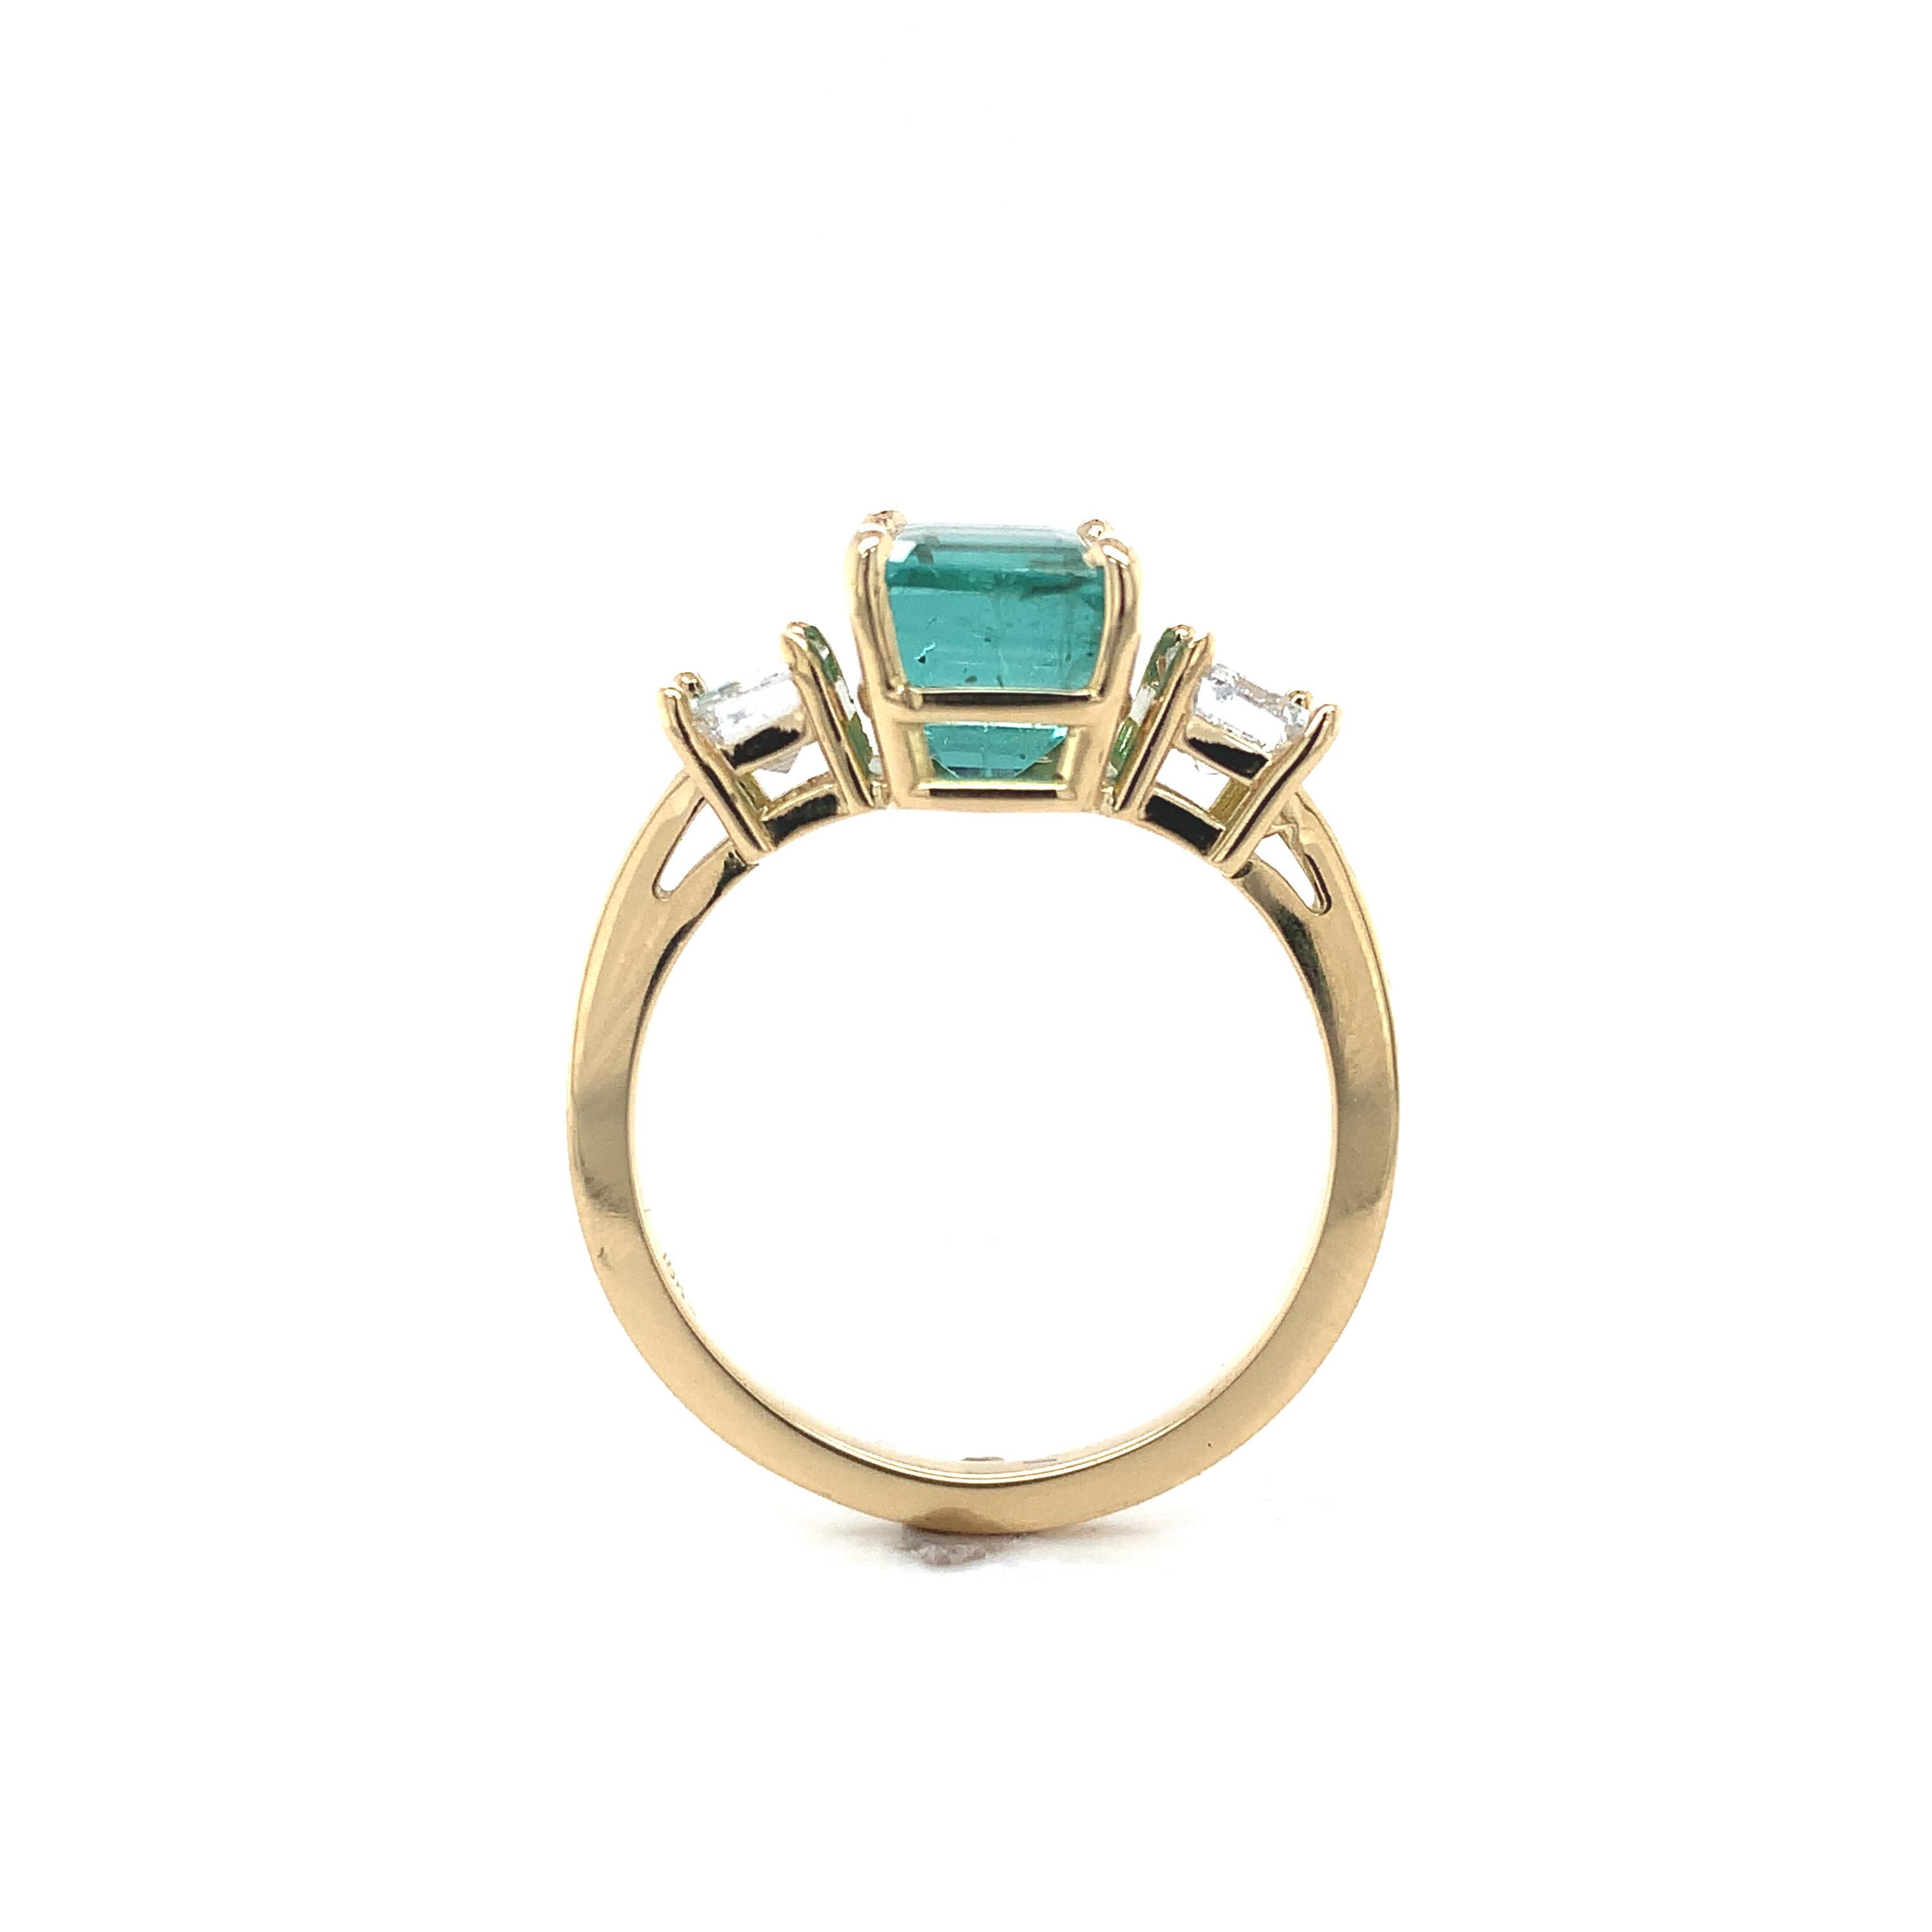 Platinum 3 stone ring featuring a rectangular step cut natural emerald weighing 2.86 carats and diamonds. All 3 stones have GIA reports. GIA report #2239098963 states natural emerald measuring 8.2mm x 7.8 x 6.7mm, stating color of green (with no